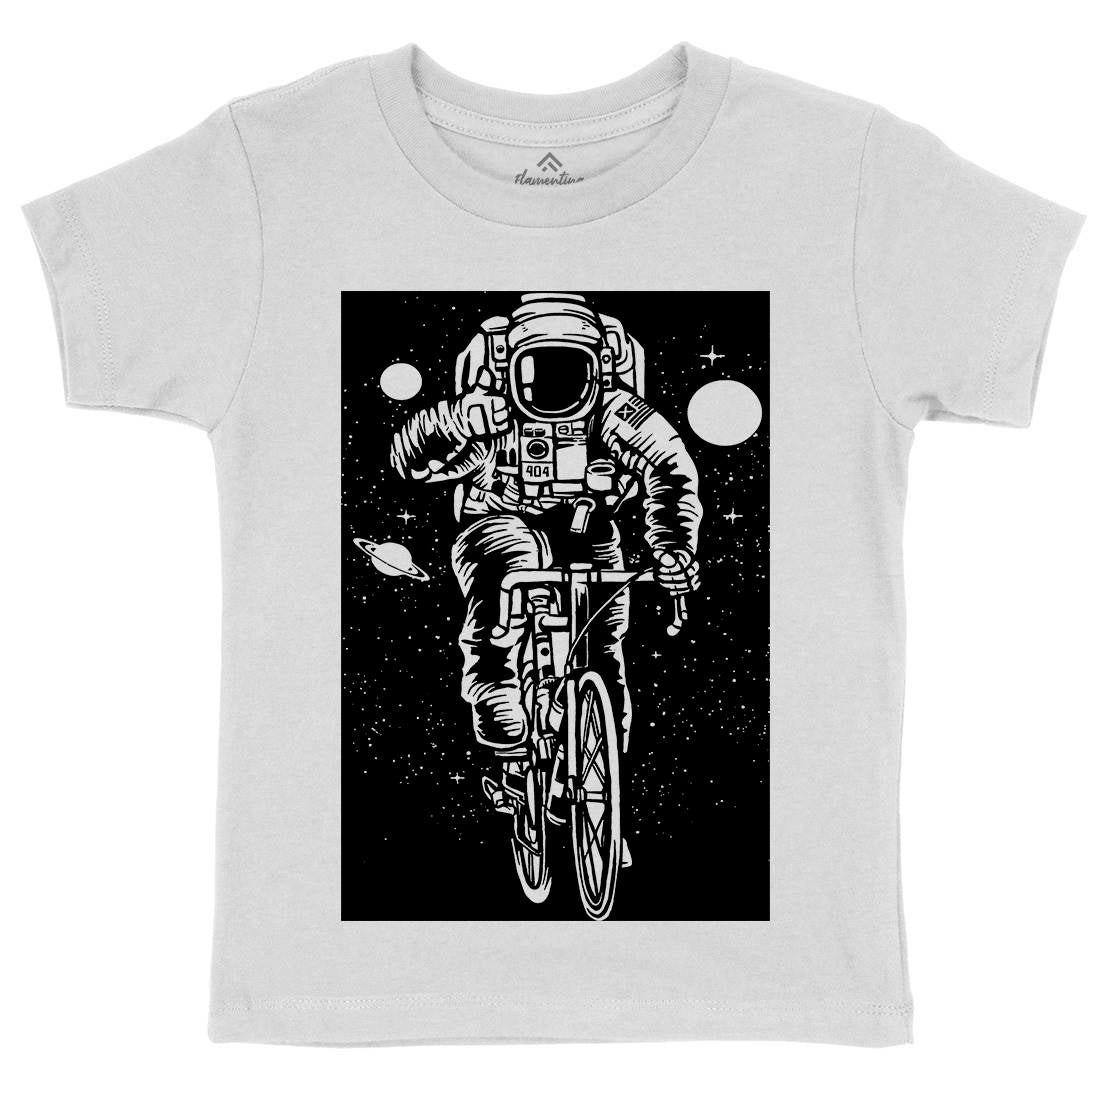 Astronaut Bicycle Kids Crew Neck T-Shirt Space A503